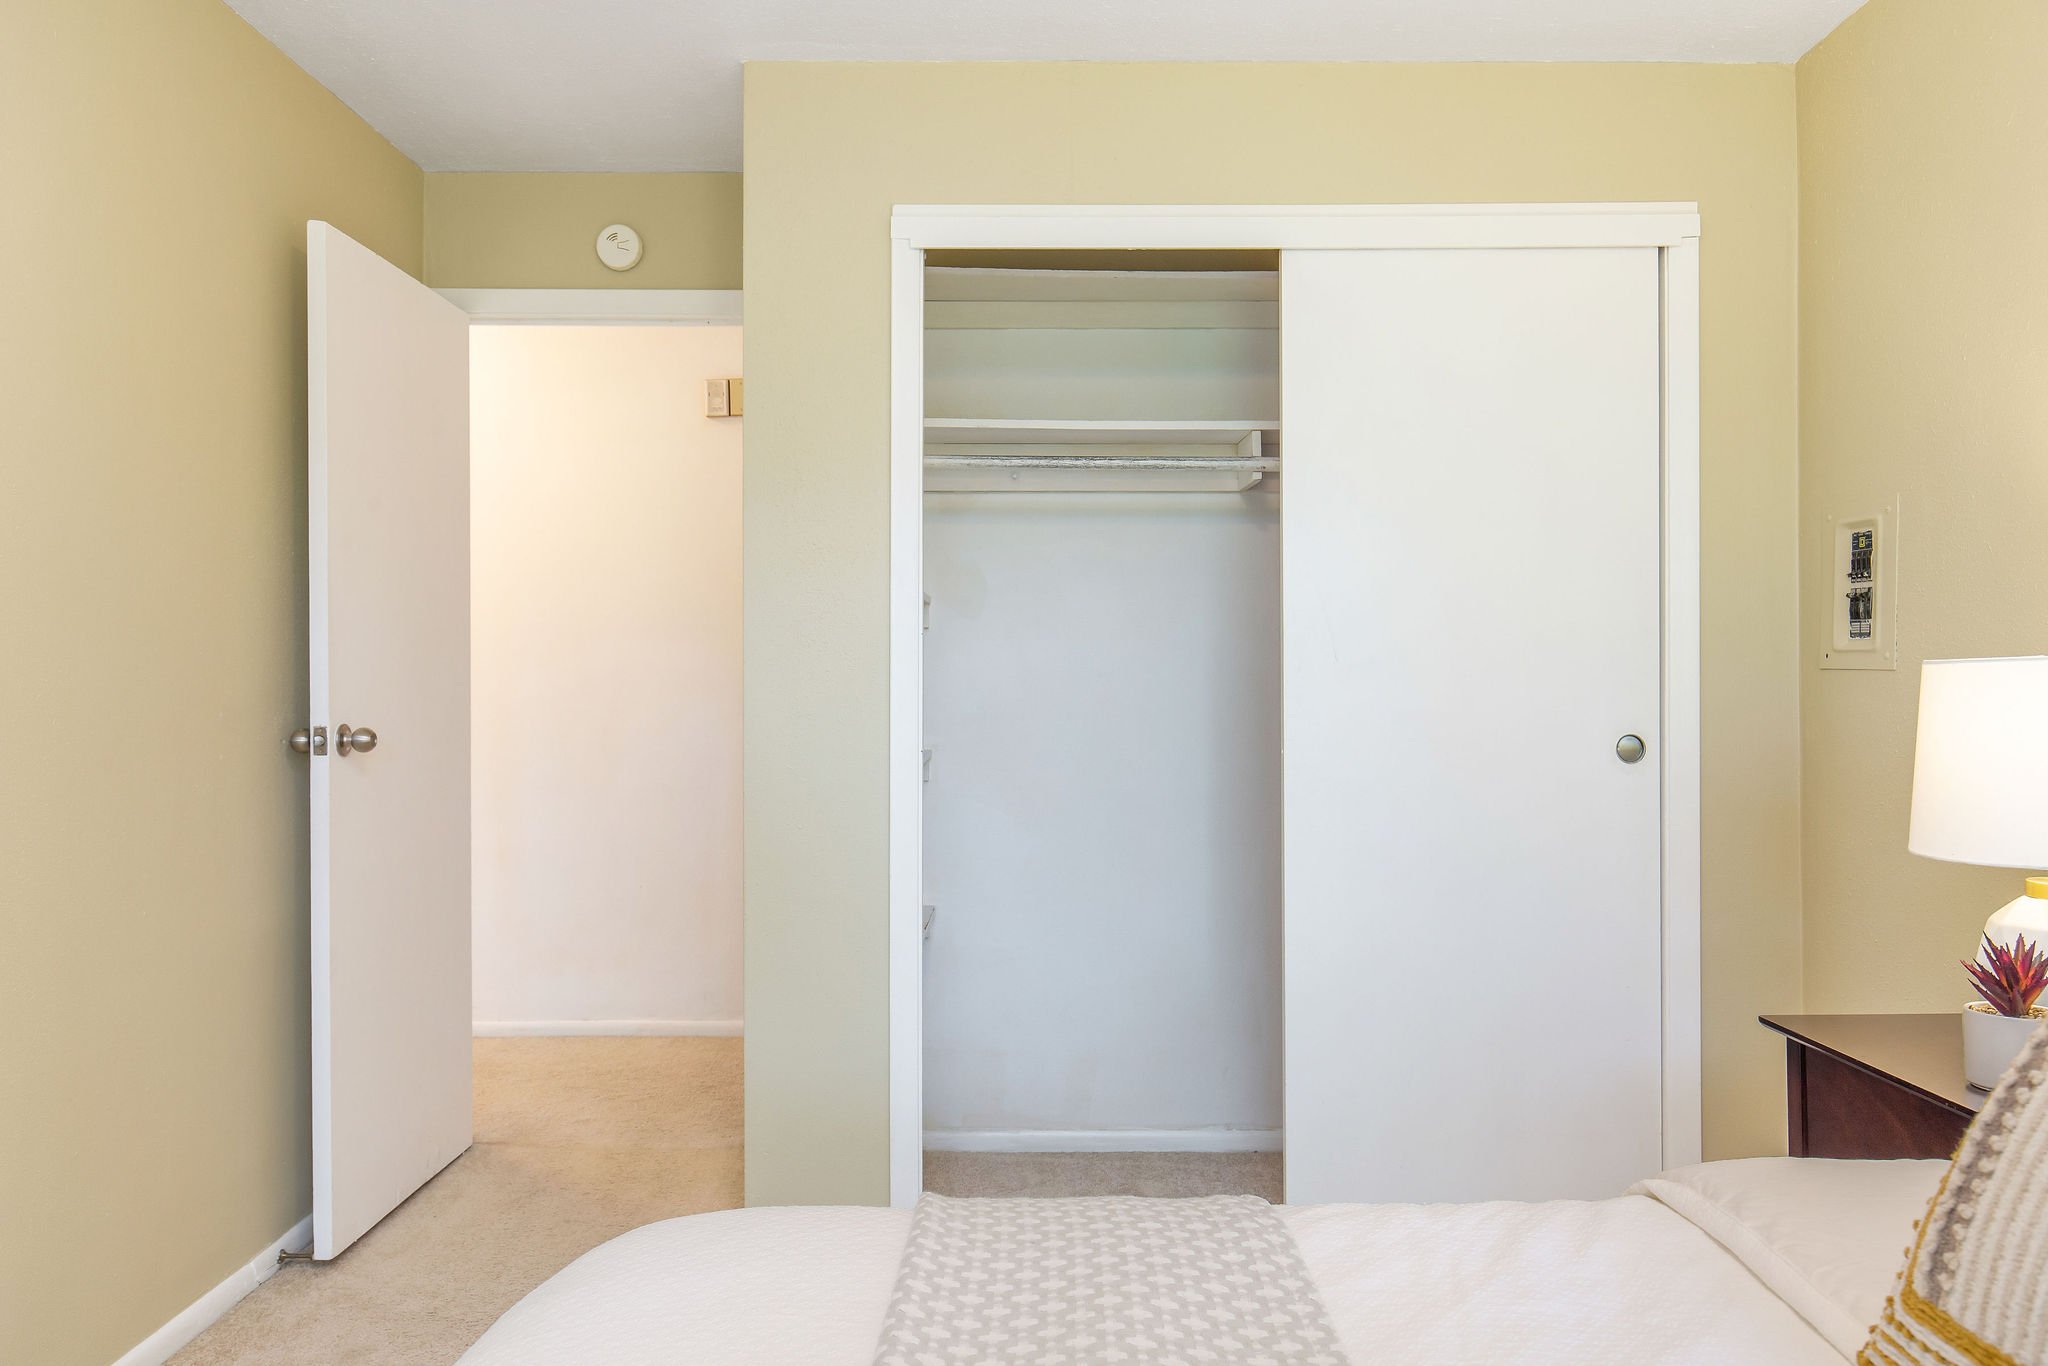  image description: interior of bedroom with queen bed, closet, and tan carpet 